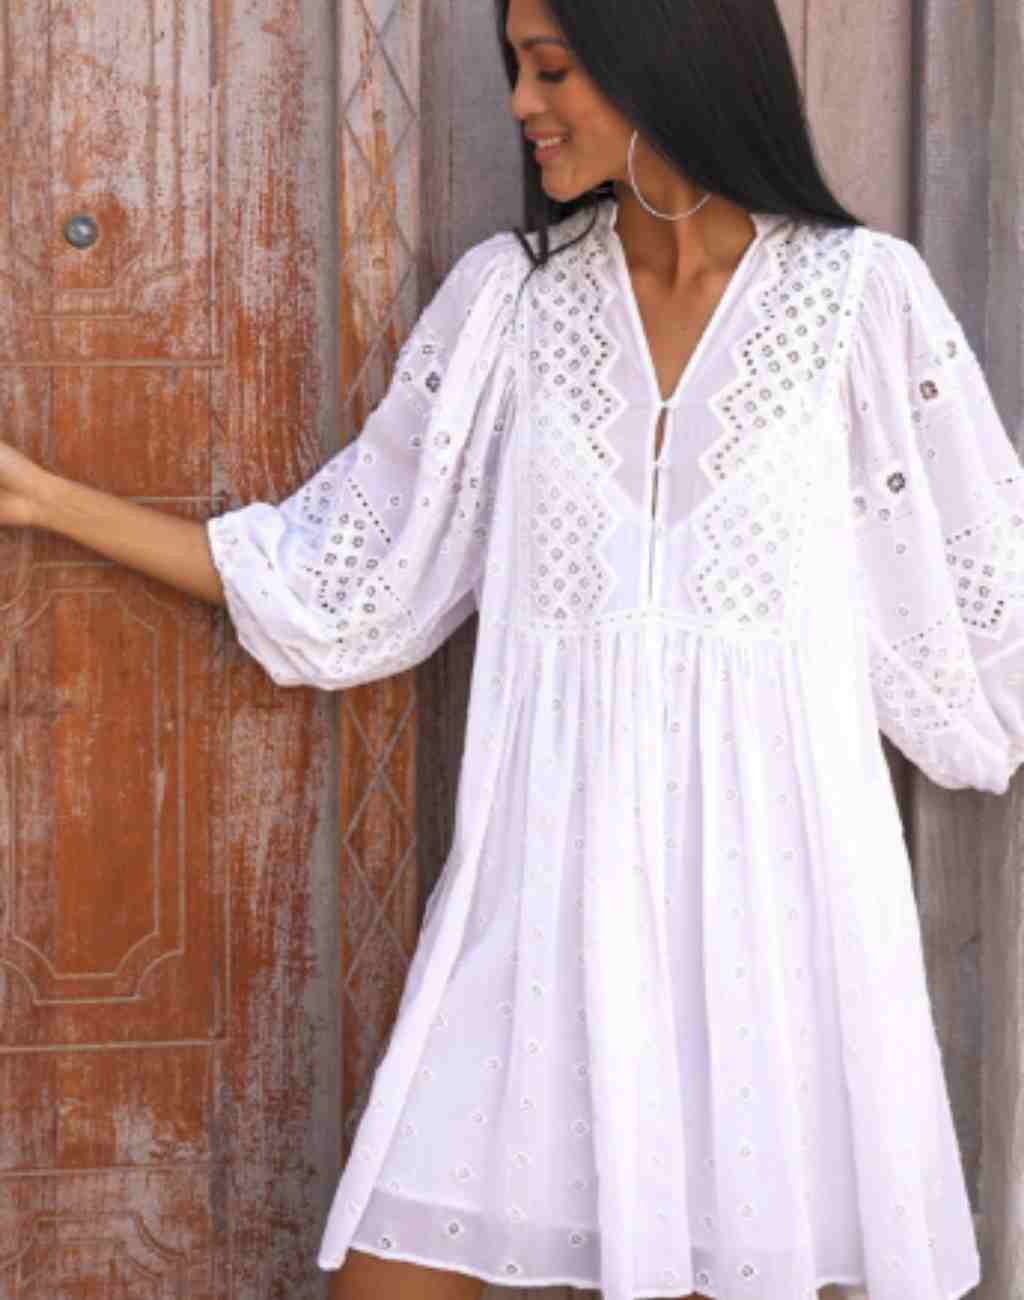 Vintage Inspired Crisp White Short Dress with Broderie Anglaise Details